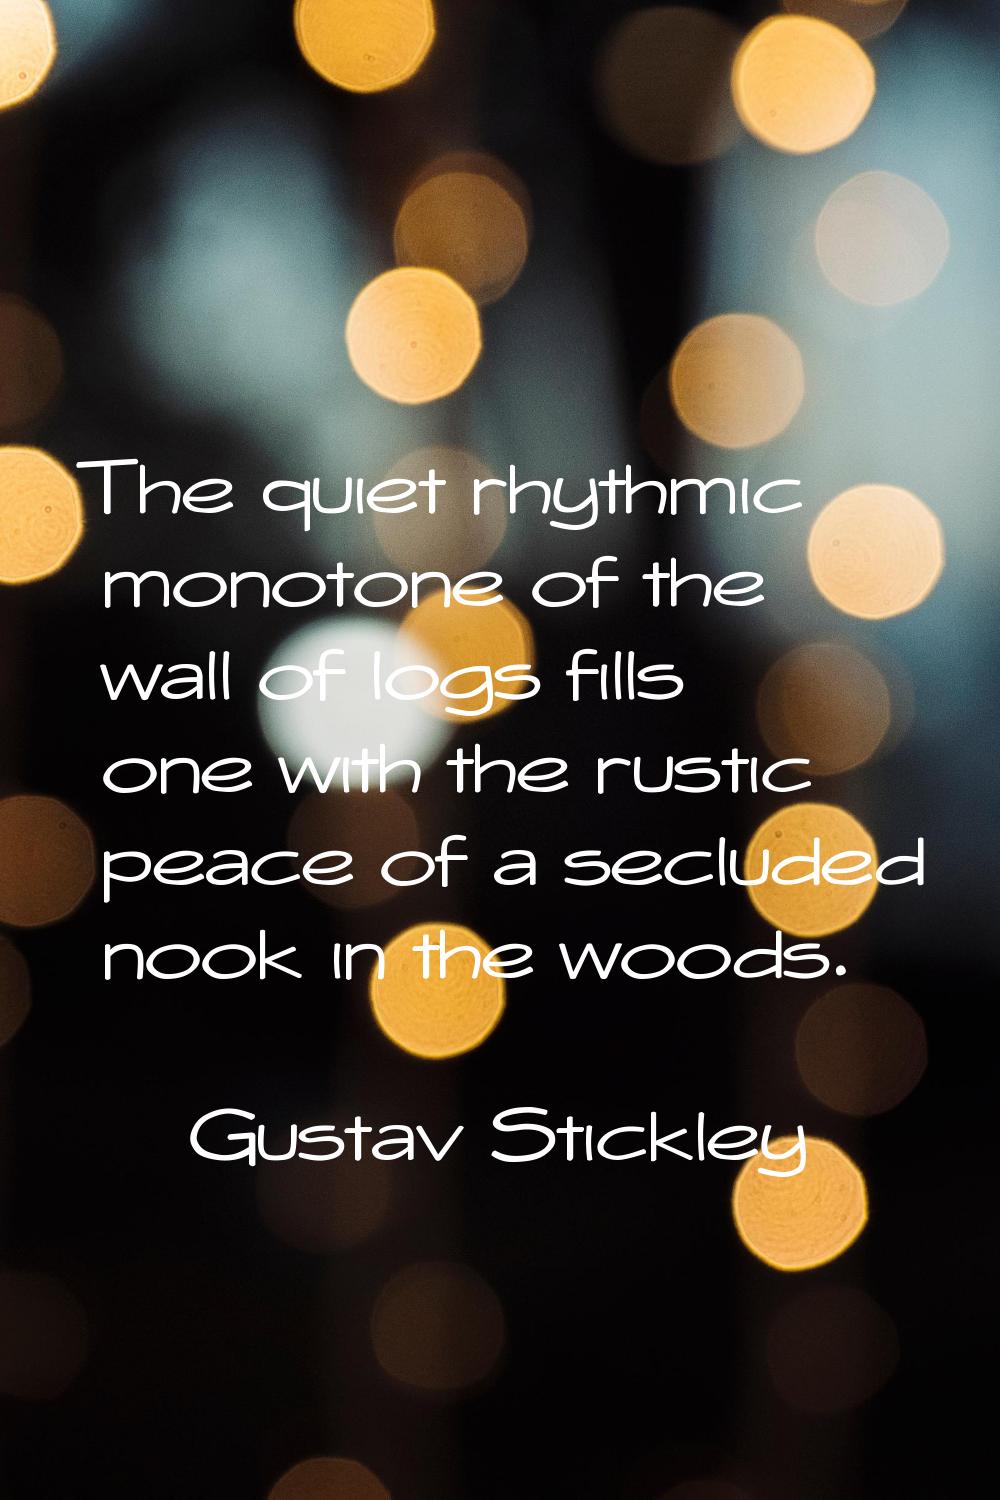 The quiet rhythmic monotone of the wall of logs fills one with the rustic peace of a secluded nook 